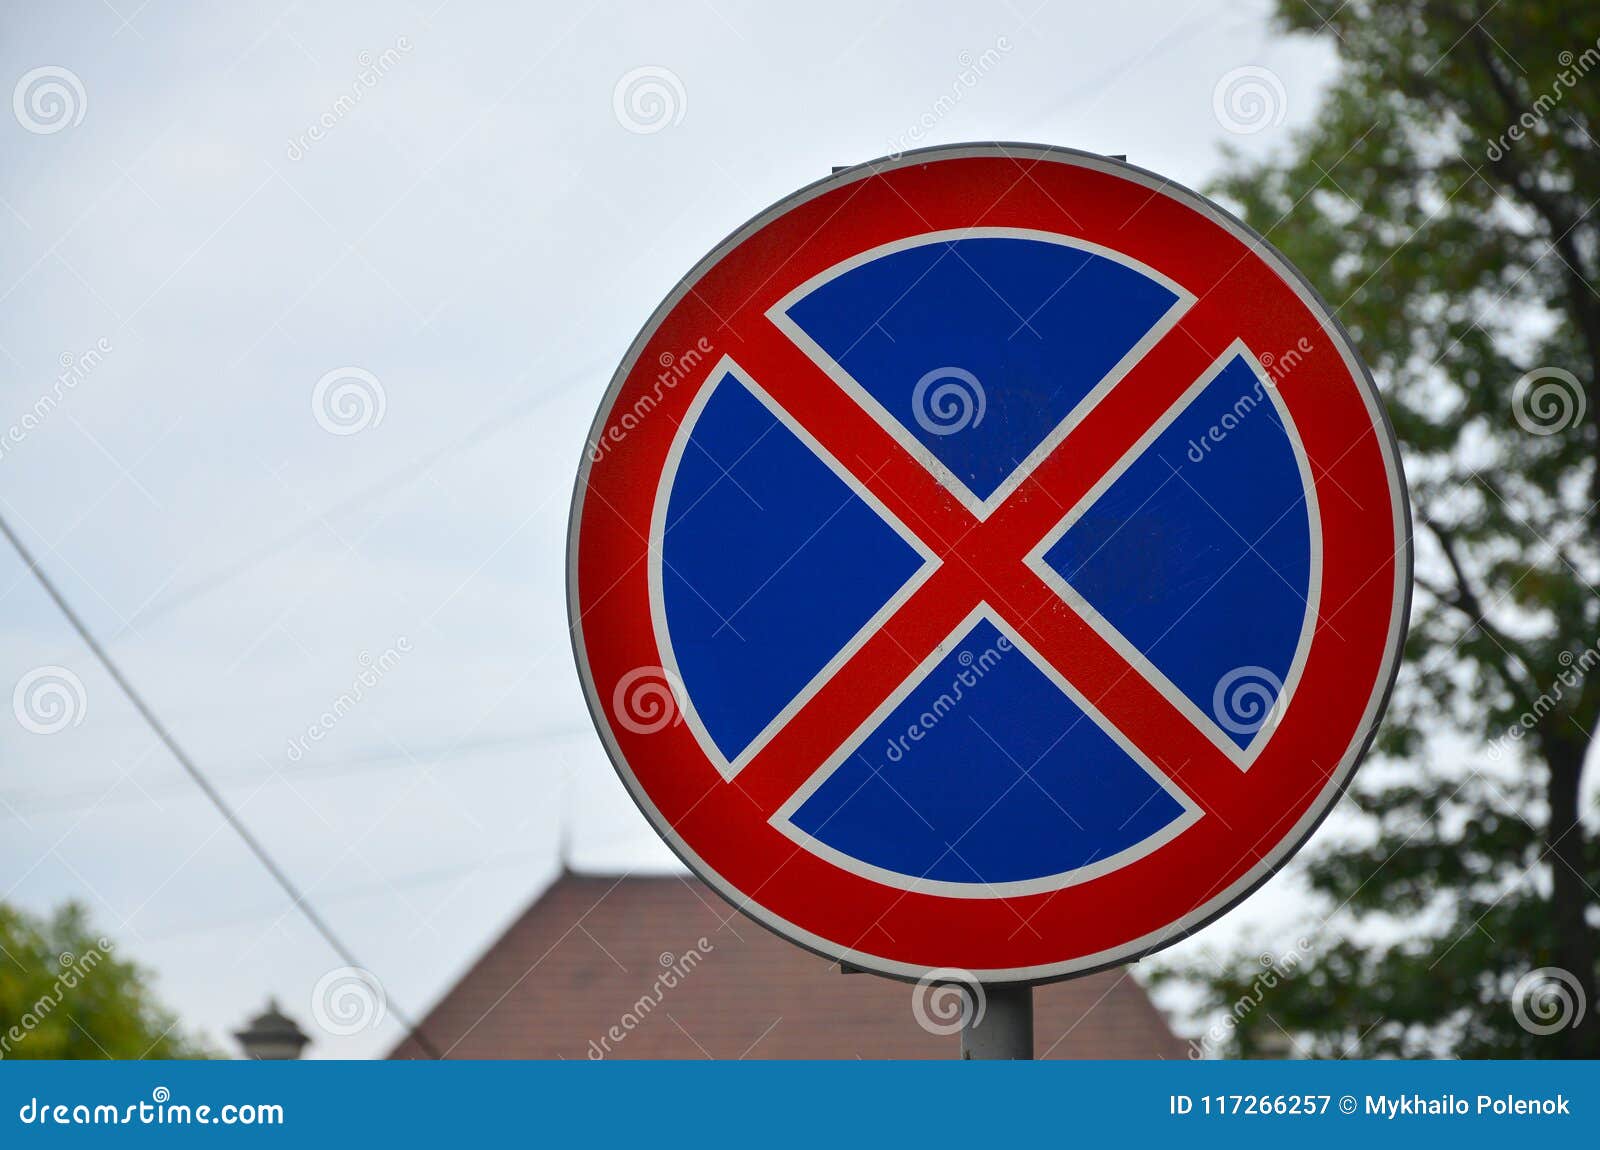 Round Road Sign with a Red Cross on a Blue Background. a Sign ...